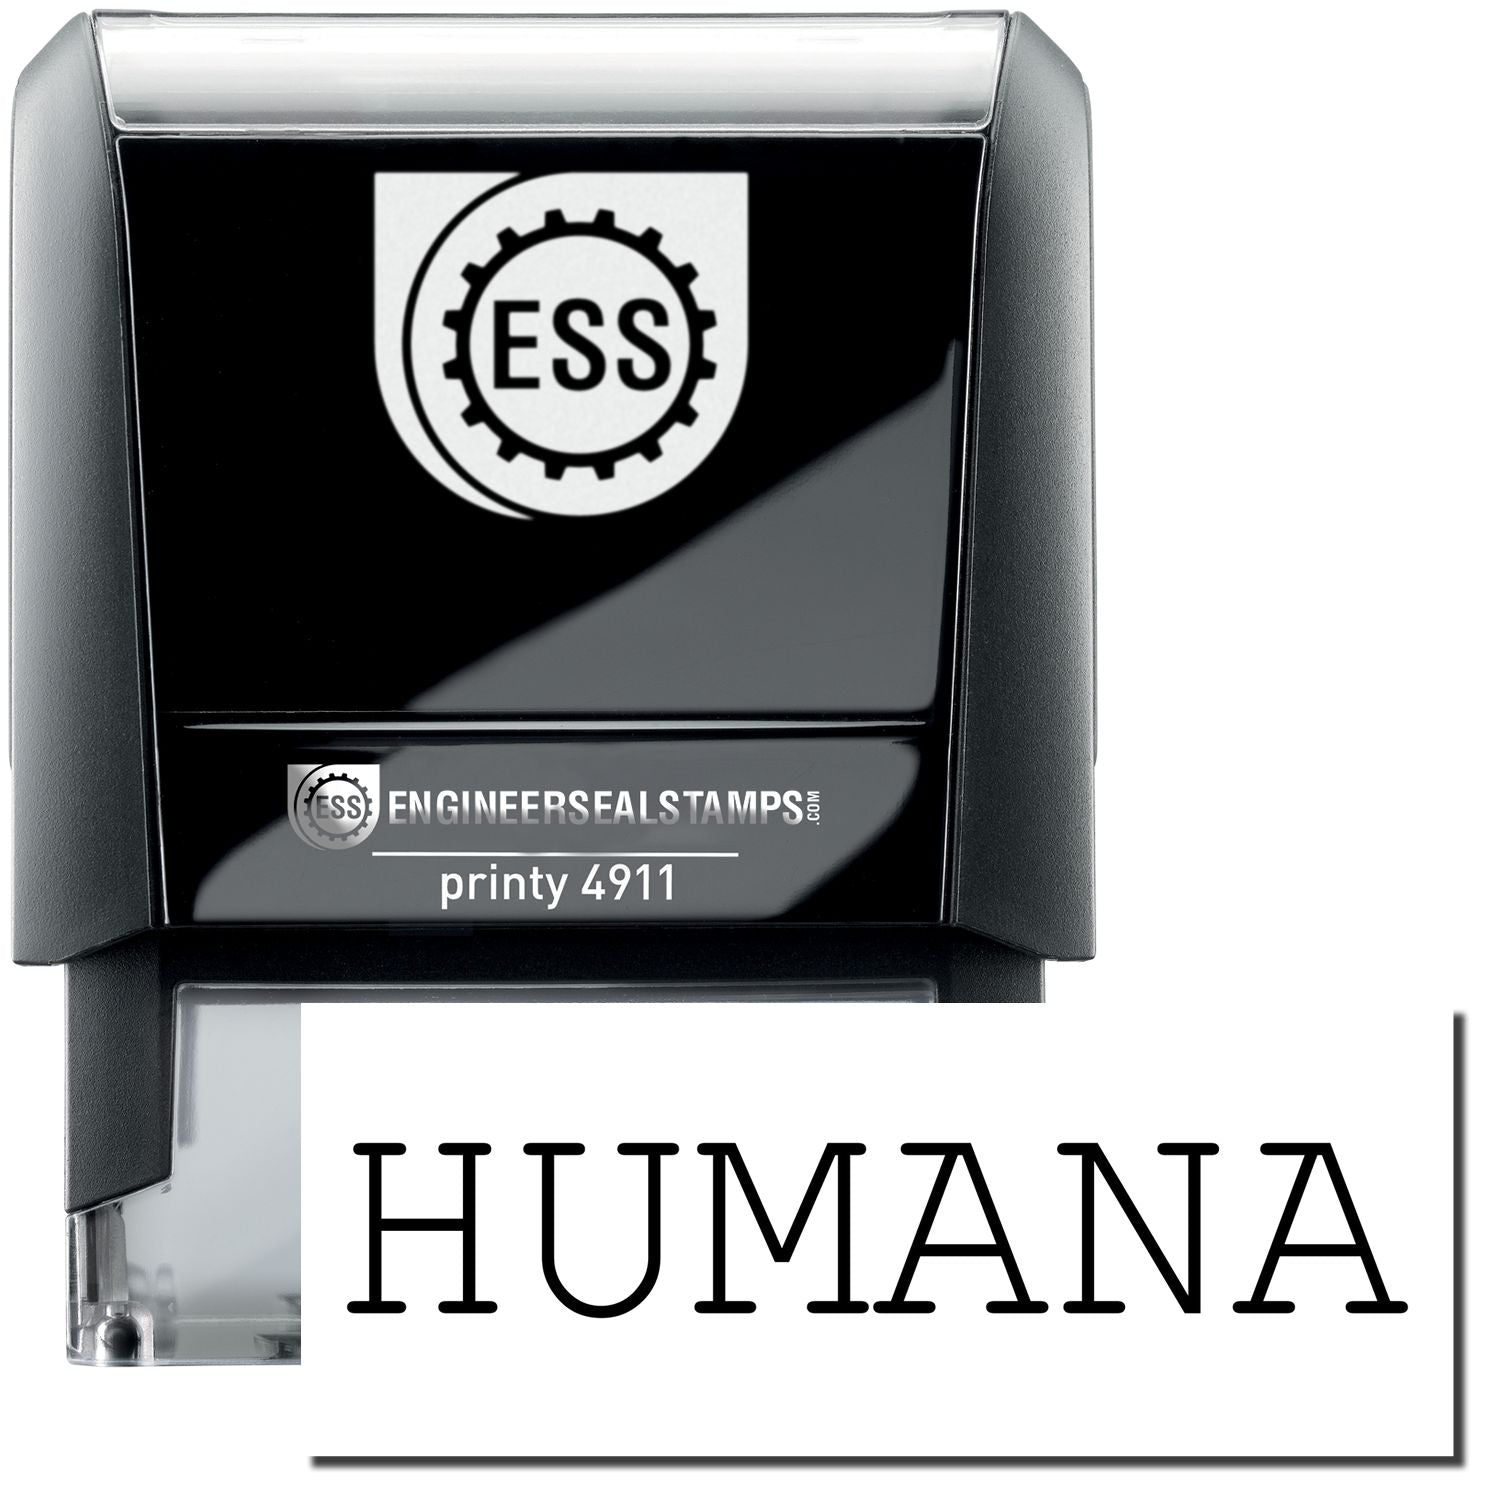 A self-inking stamp with a stamped image showing how the text "HUMANA" is displayed after stamping.